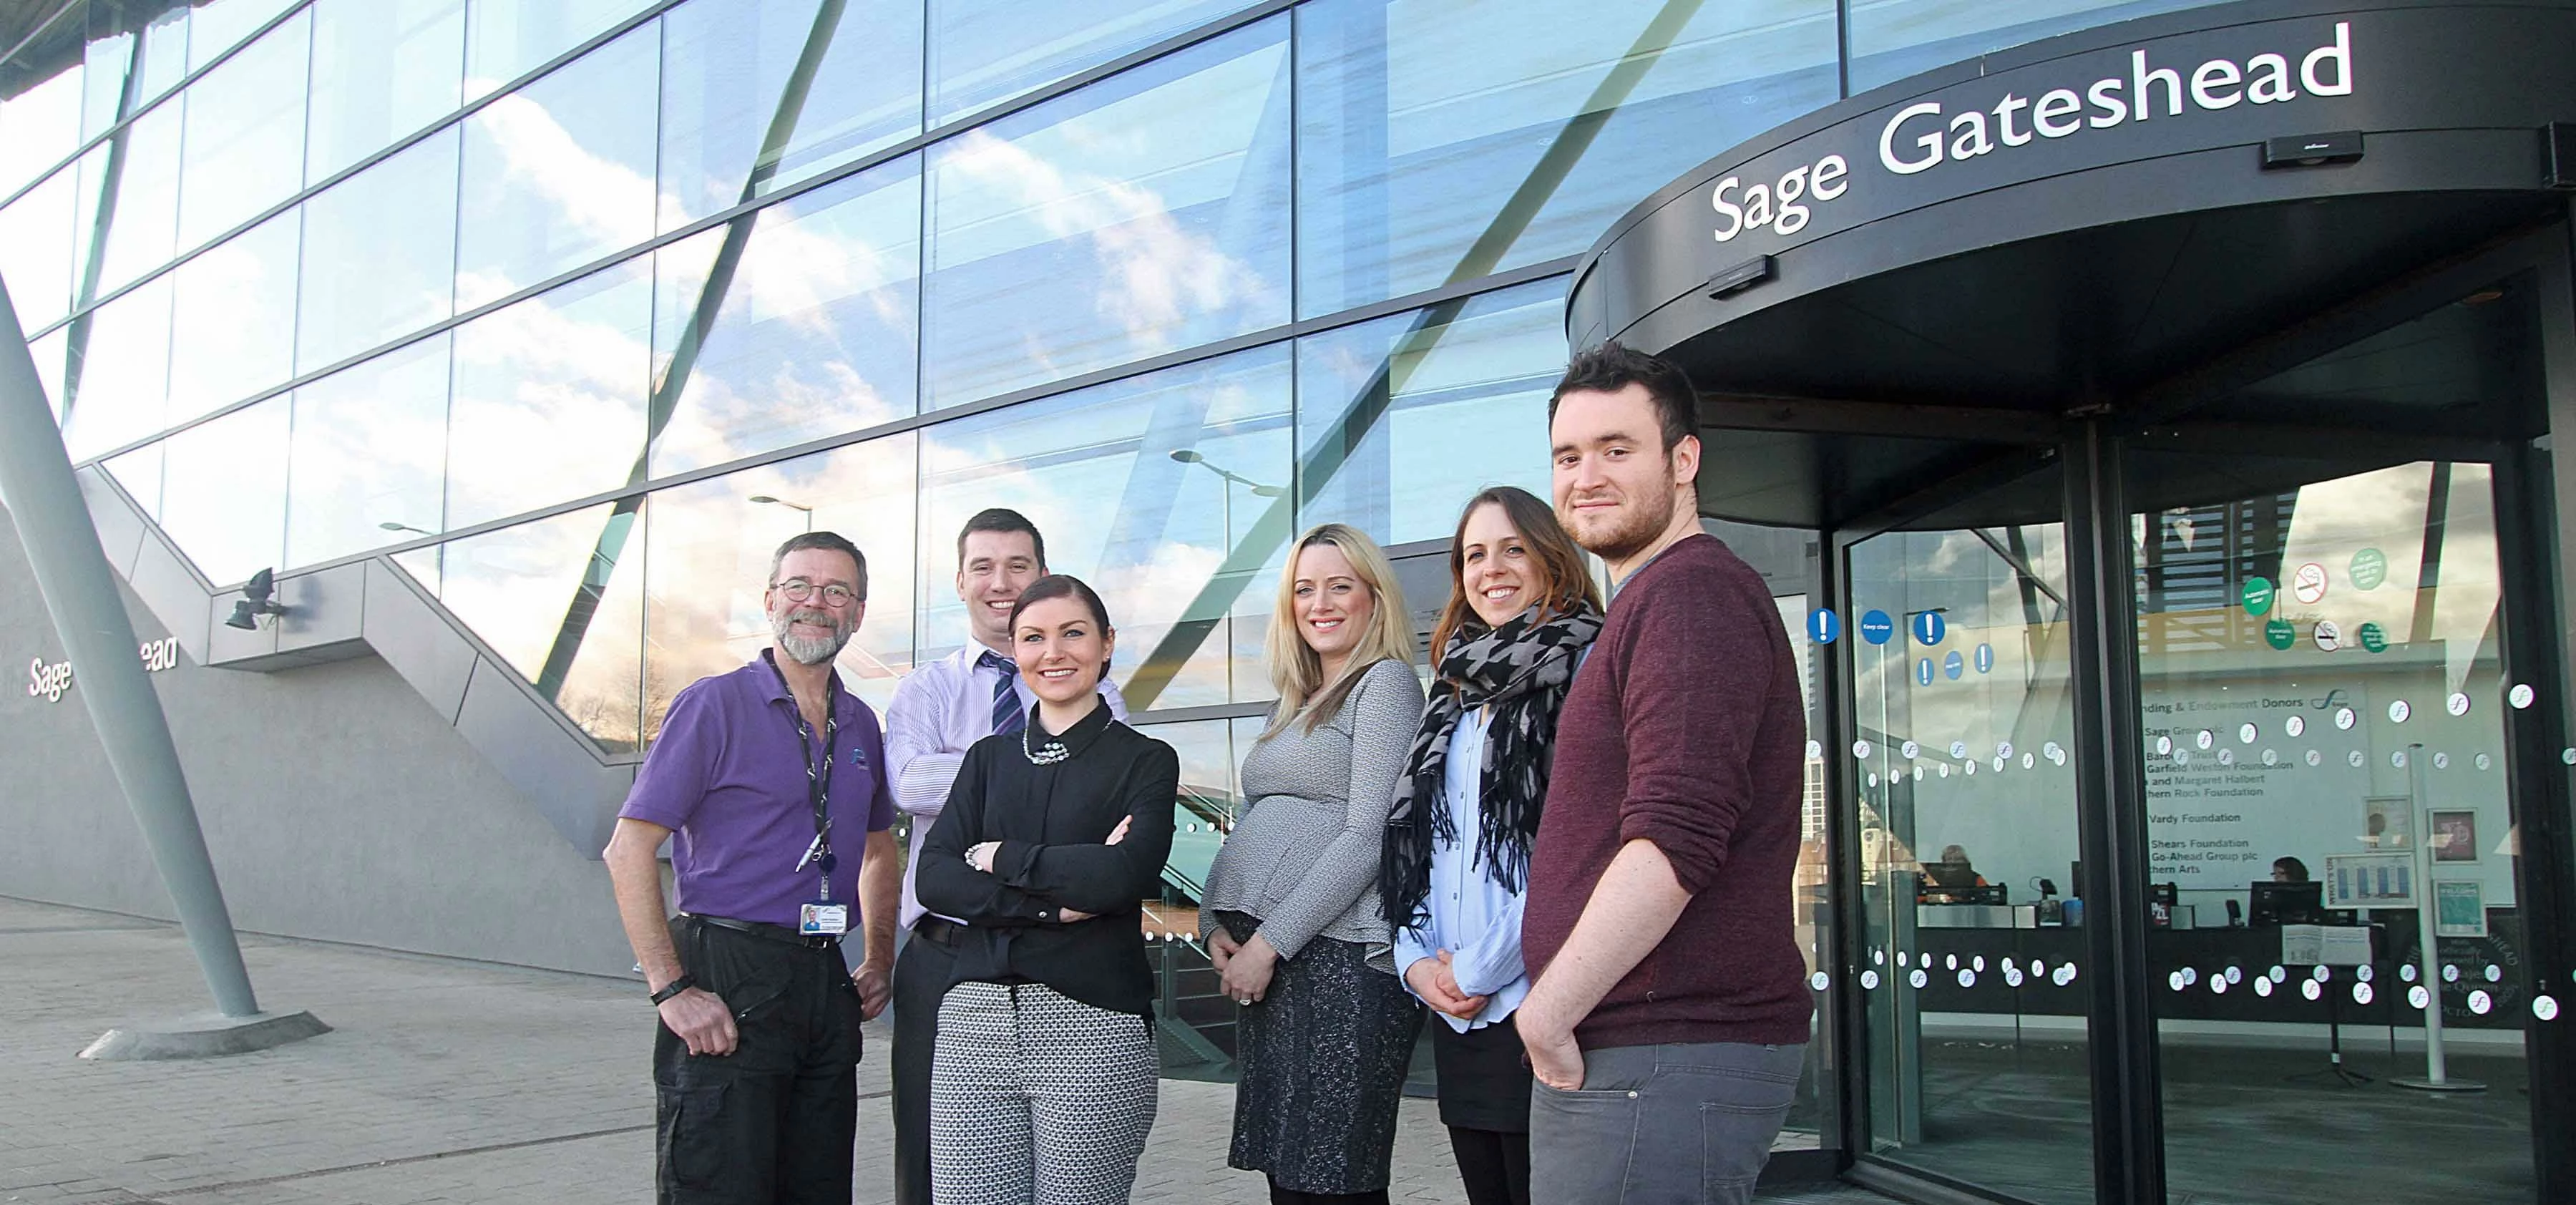 North East culture: training specialists Ingeus helps develop future managers